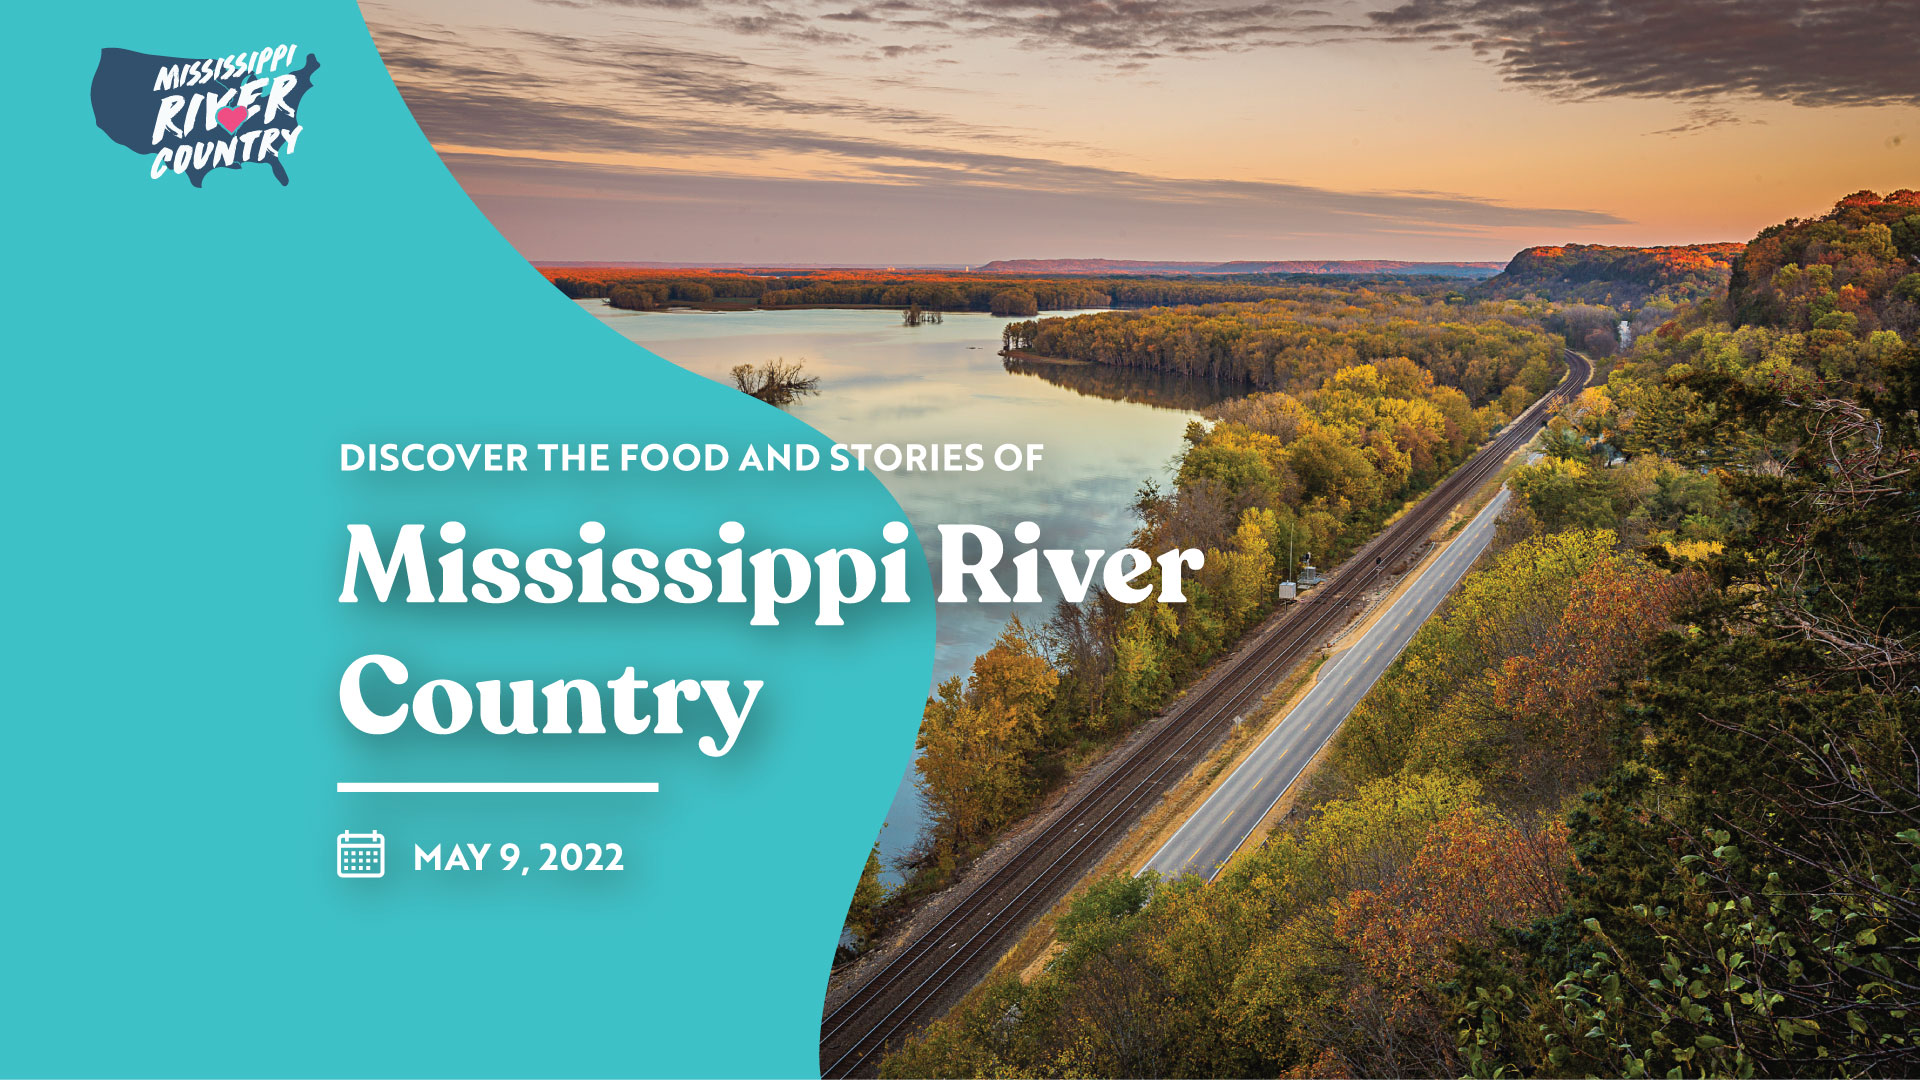 Discover the food and stories of Mississippi River Country | May 9, 2022